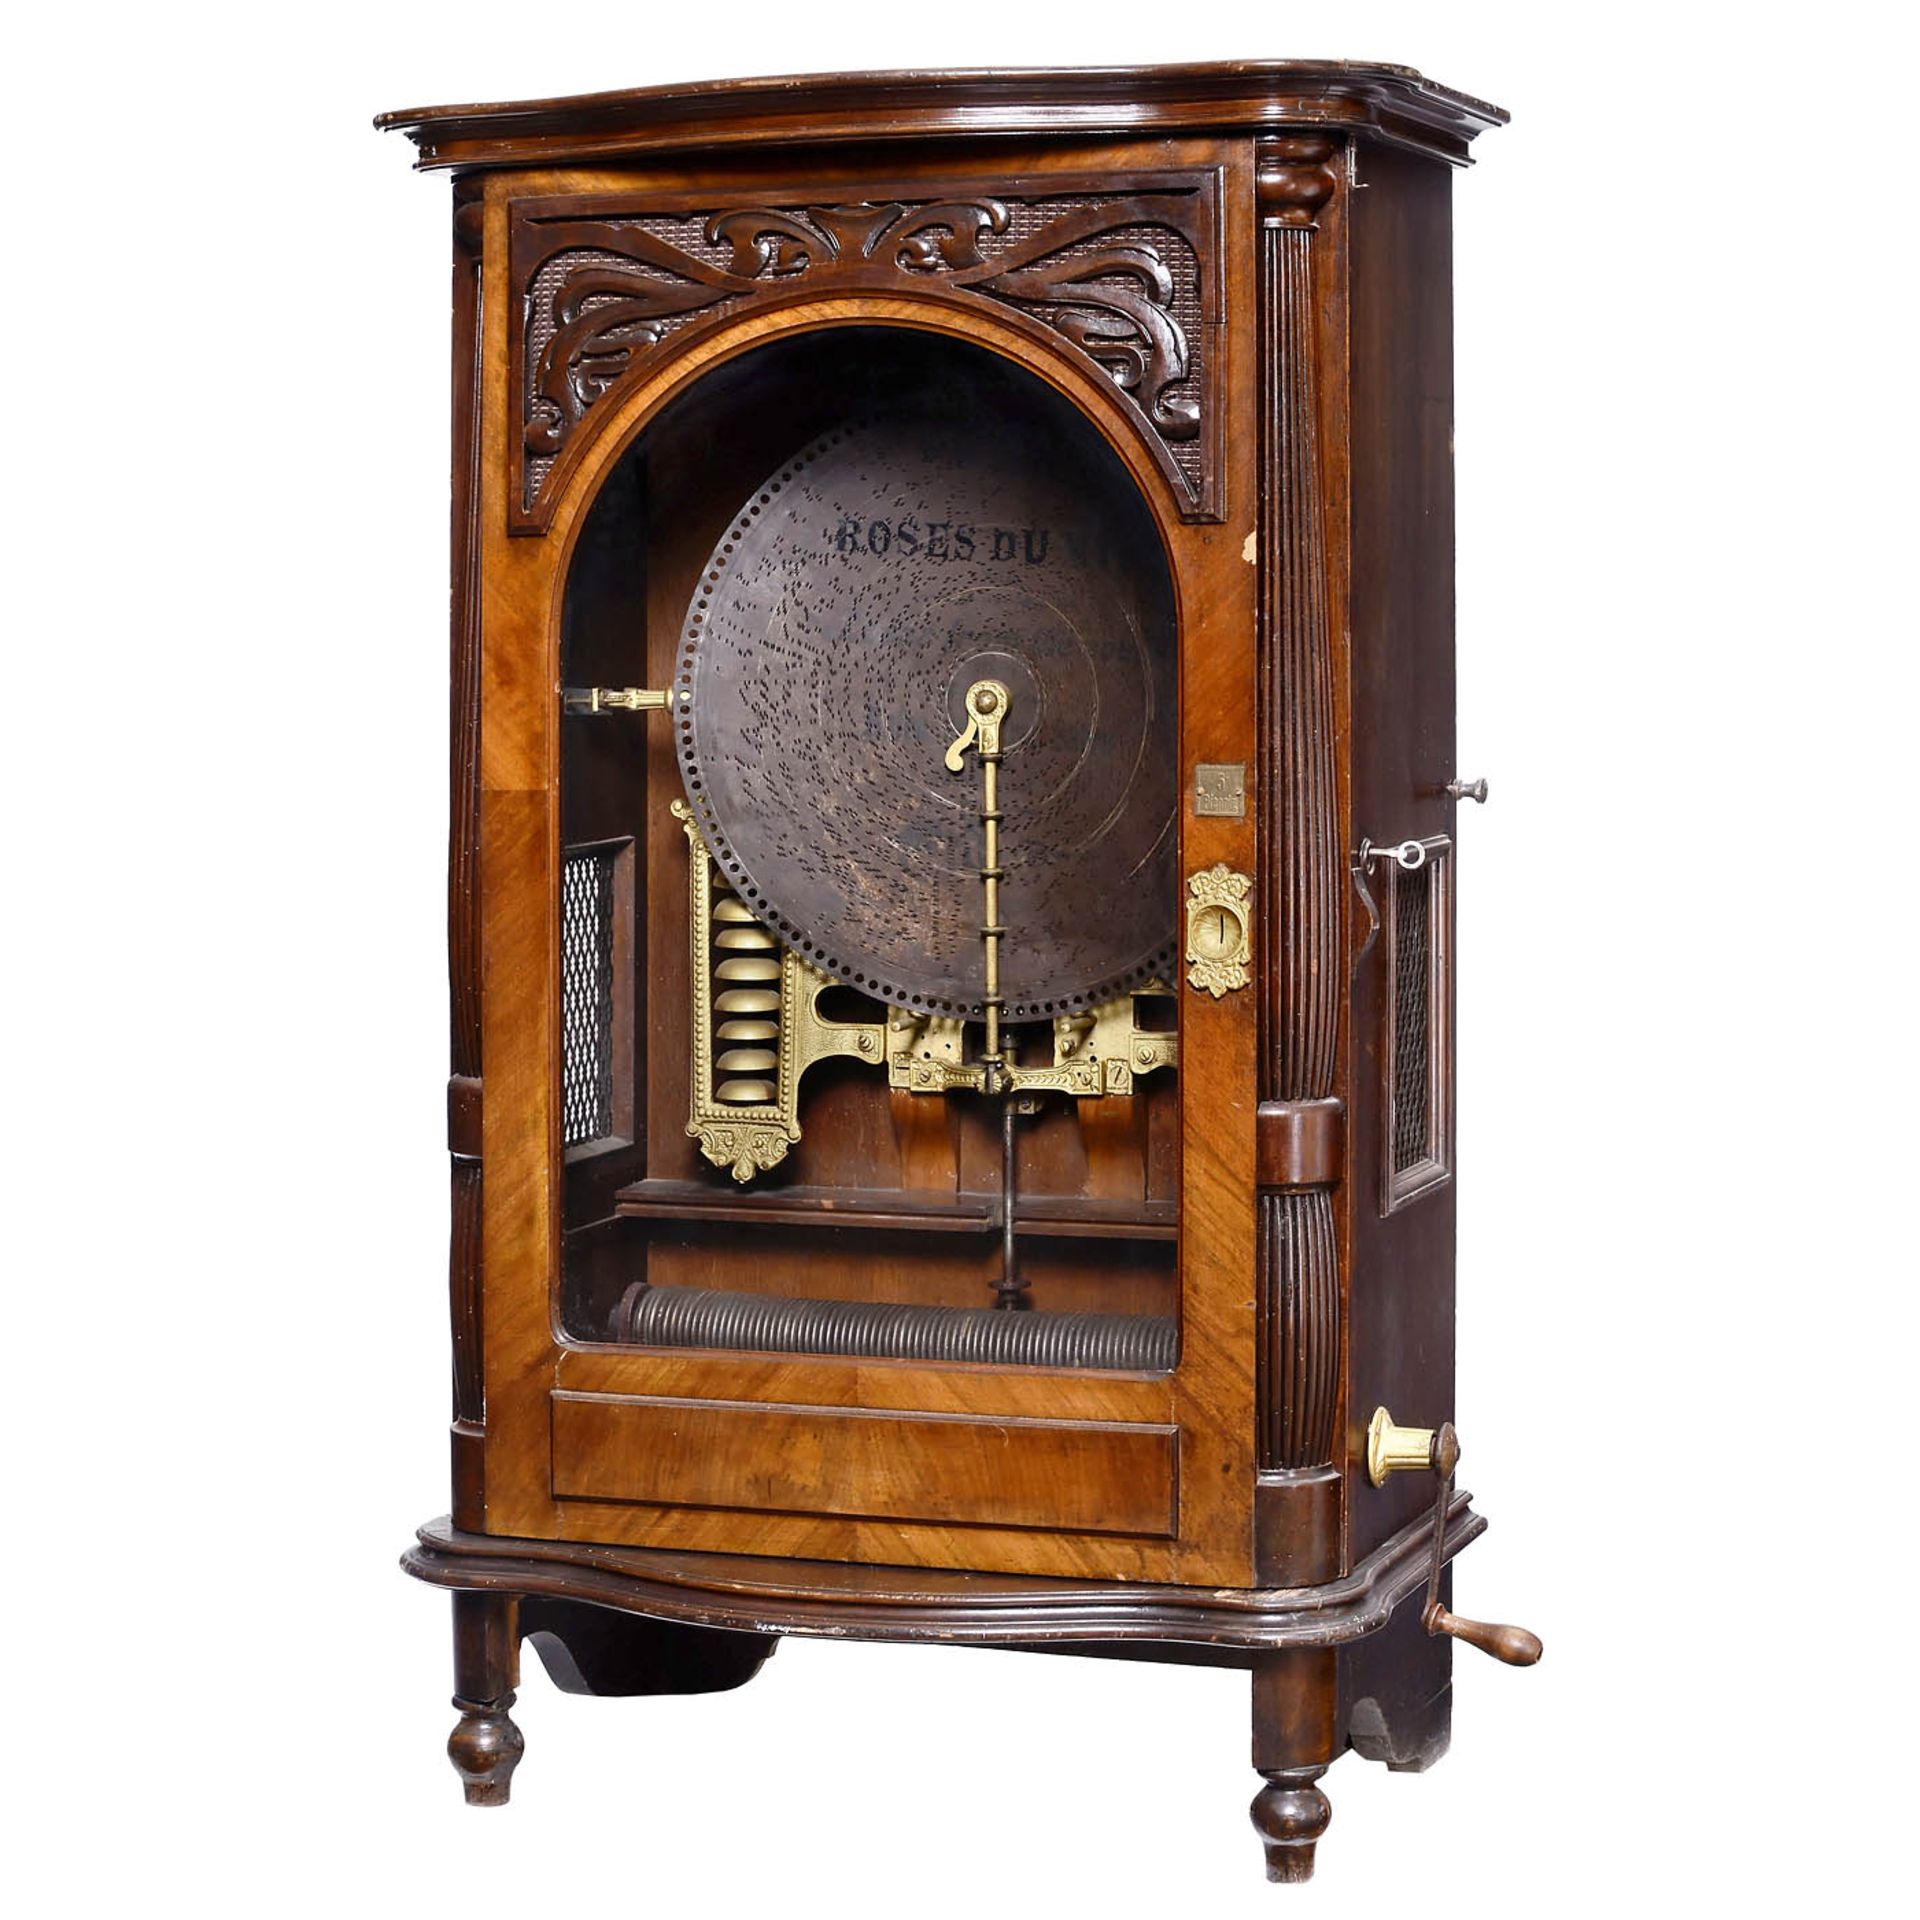 Polyphon Style 104 Coin-Operated Disc Musical Box with Bells, c. 1905